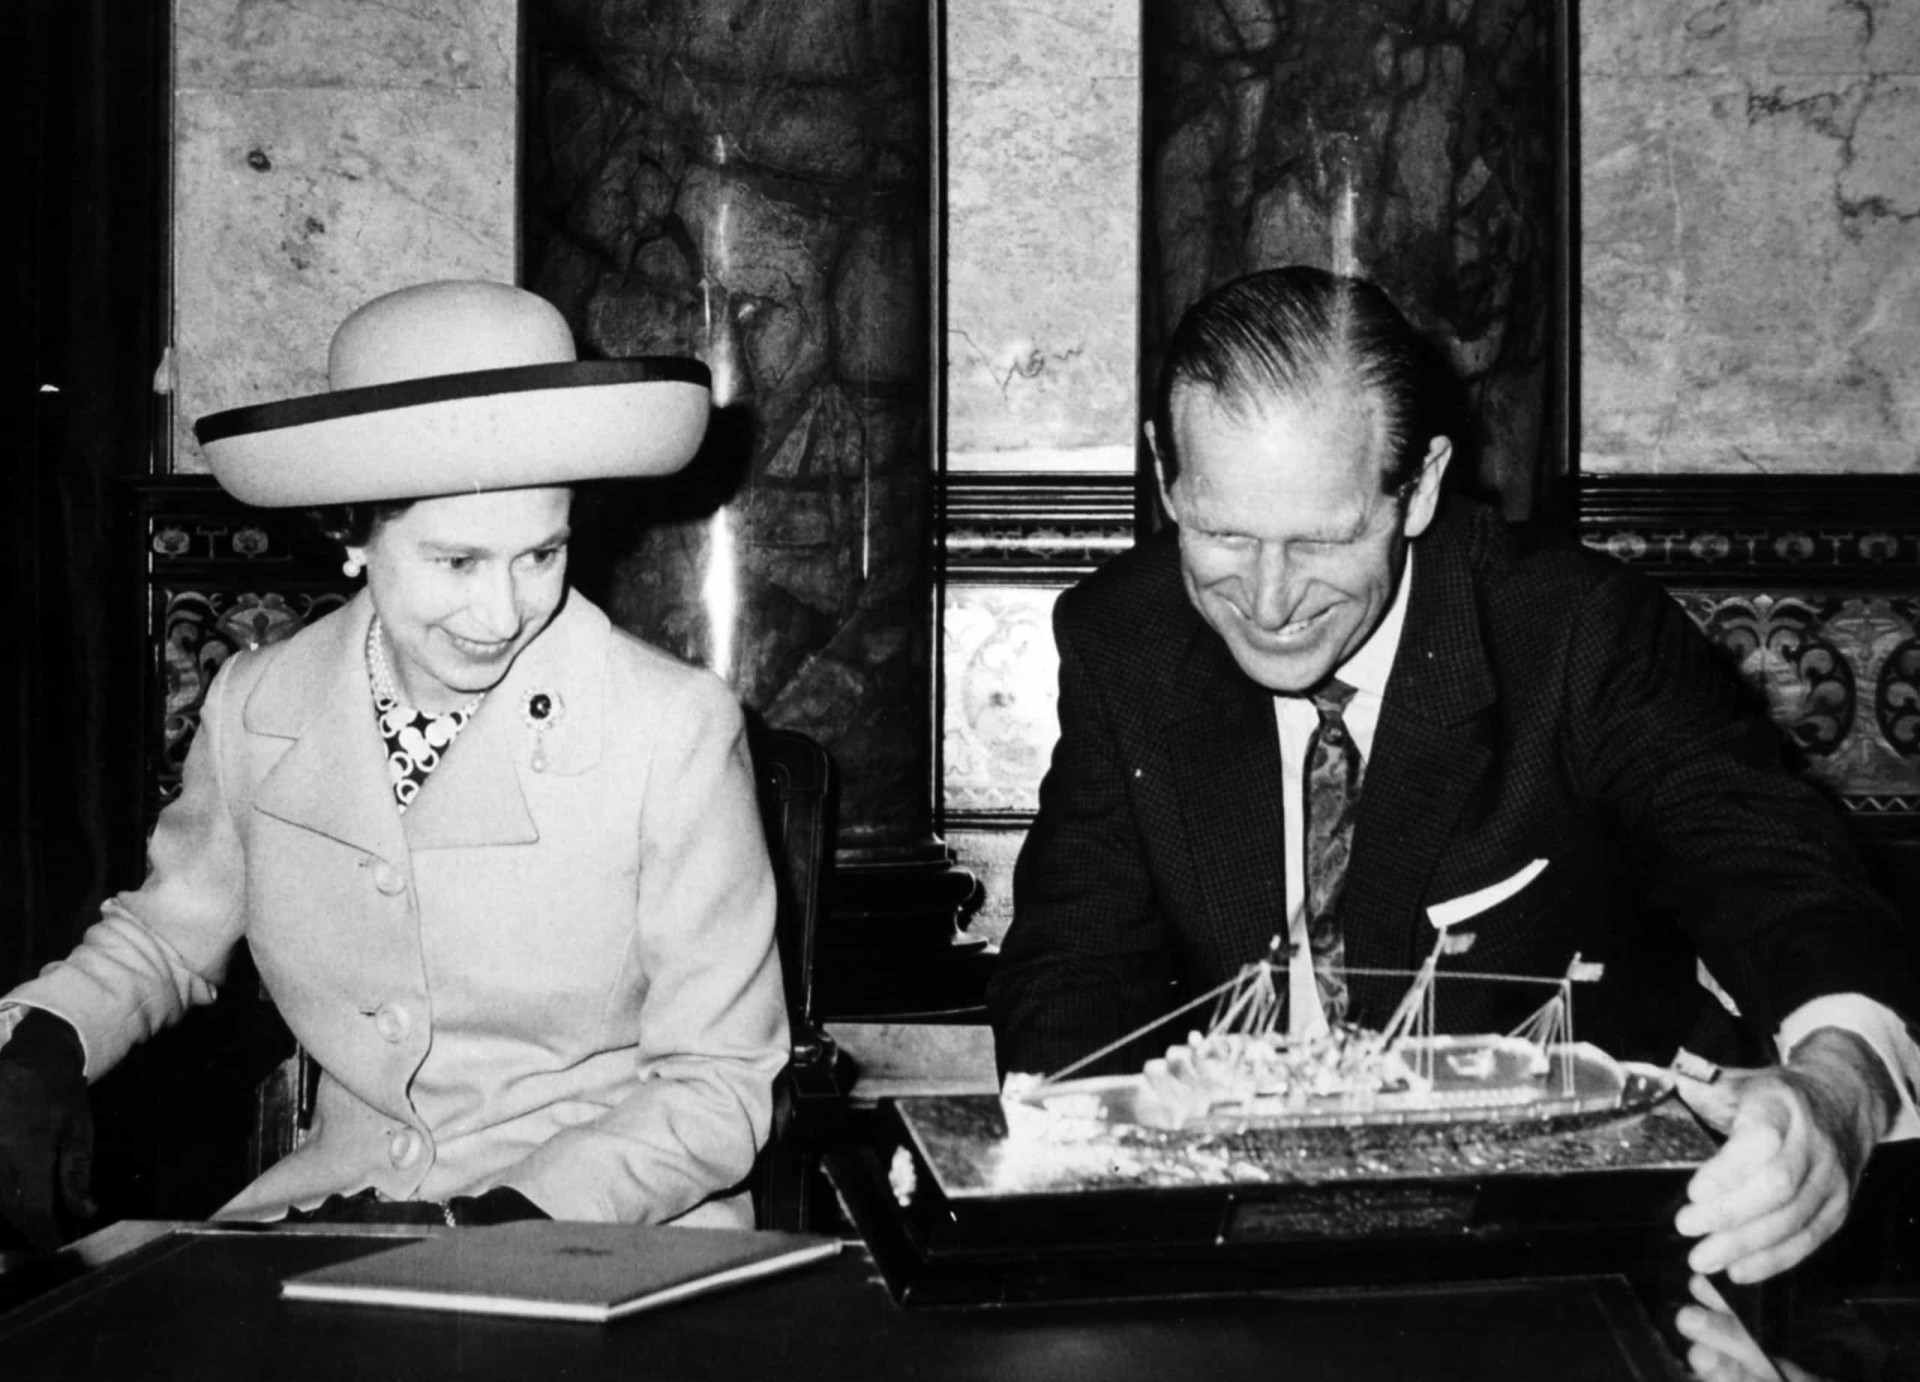 <p>Queen Elizabeth II and the Duke of Edinburgh admire a gift received after the monarch opened the new accommodation of Lloyd's Register of Shipping at the society's City of London headquarters. The gift was a silver model replica of the Royal Yacht <em>Britannia</em>.</p><p>You may also like:<a href="https://www.starsinsider.com/n/339710?utm_source=msn.com&utm_medium=display&utm_campaign=referral_description&utm_content=474709v3en-sg"> Bugshots: insects as you've never seen them before!</a></p>